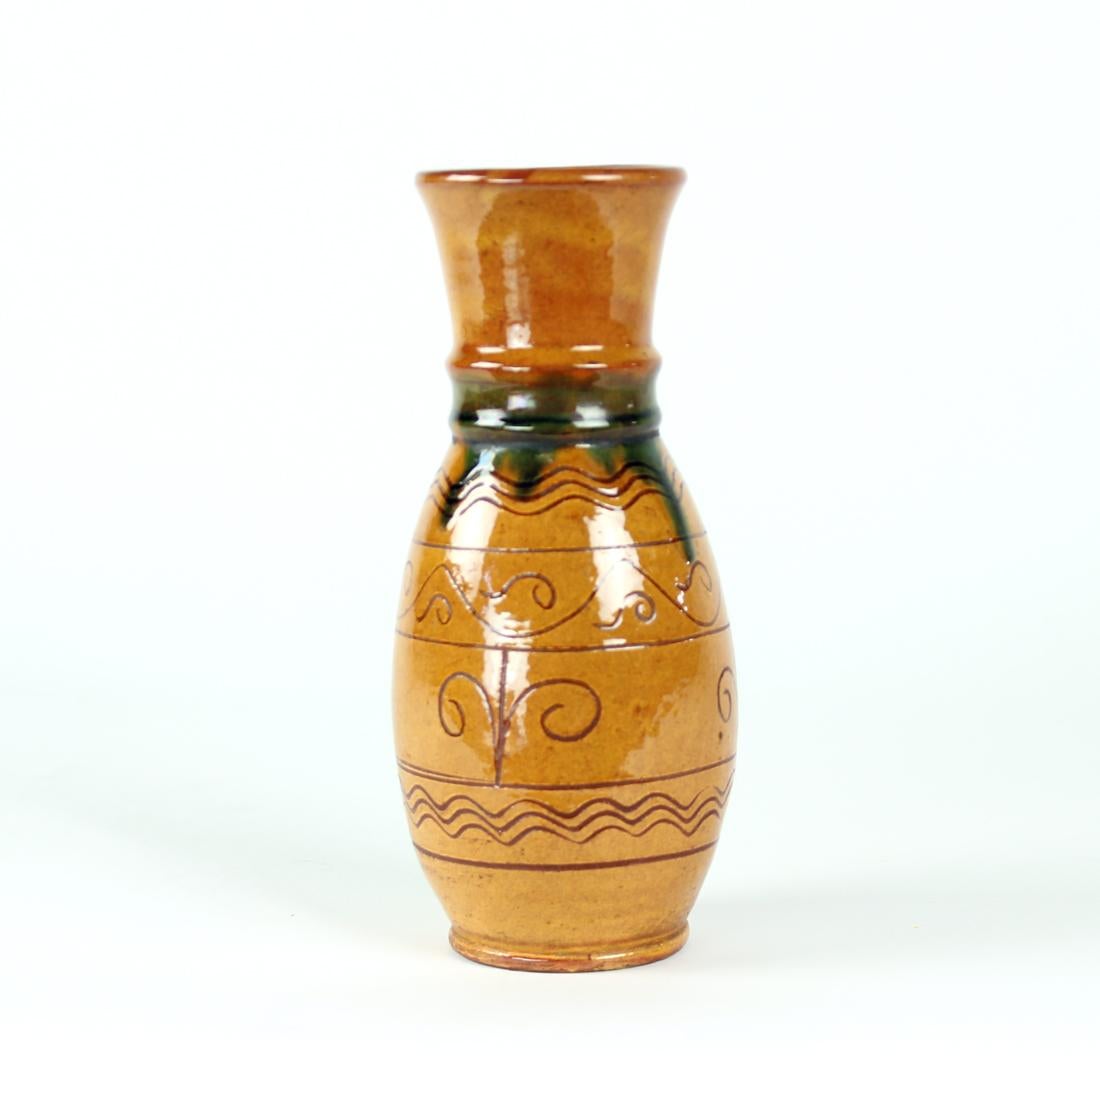 Beautiful vintage vase, made of ceramic with glazed finish. Interesting design and color combination. The vase is in a brown shade of color with a blue details on the neck of the vase. There are also folk art ornaments on the ceramic clay itself.